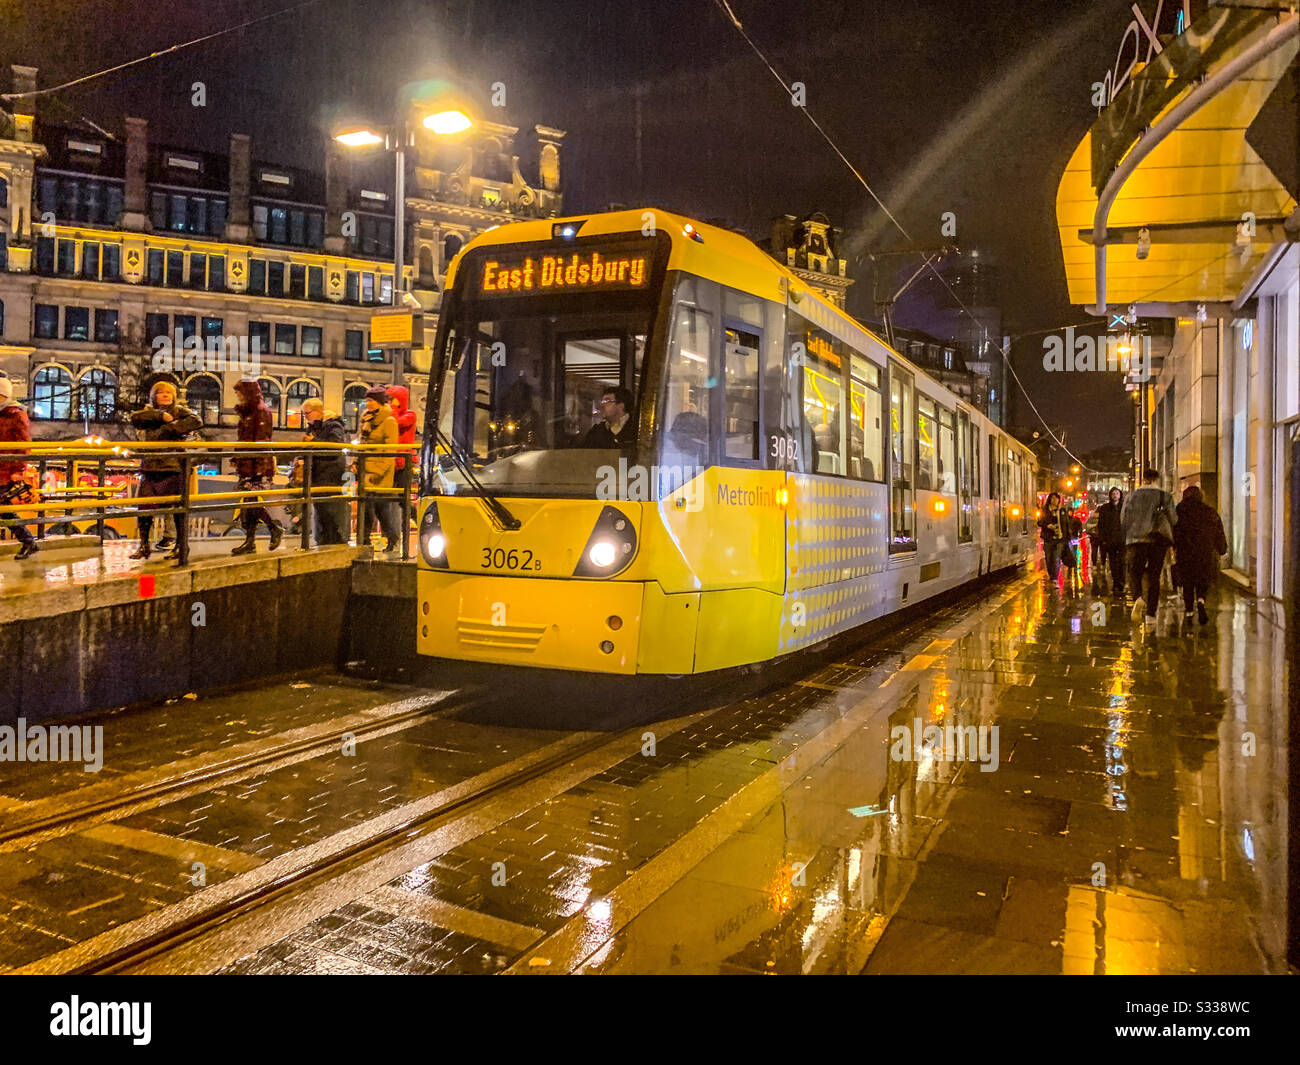 Metrolink tram at Exchange Square in Manchester Stock Photo